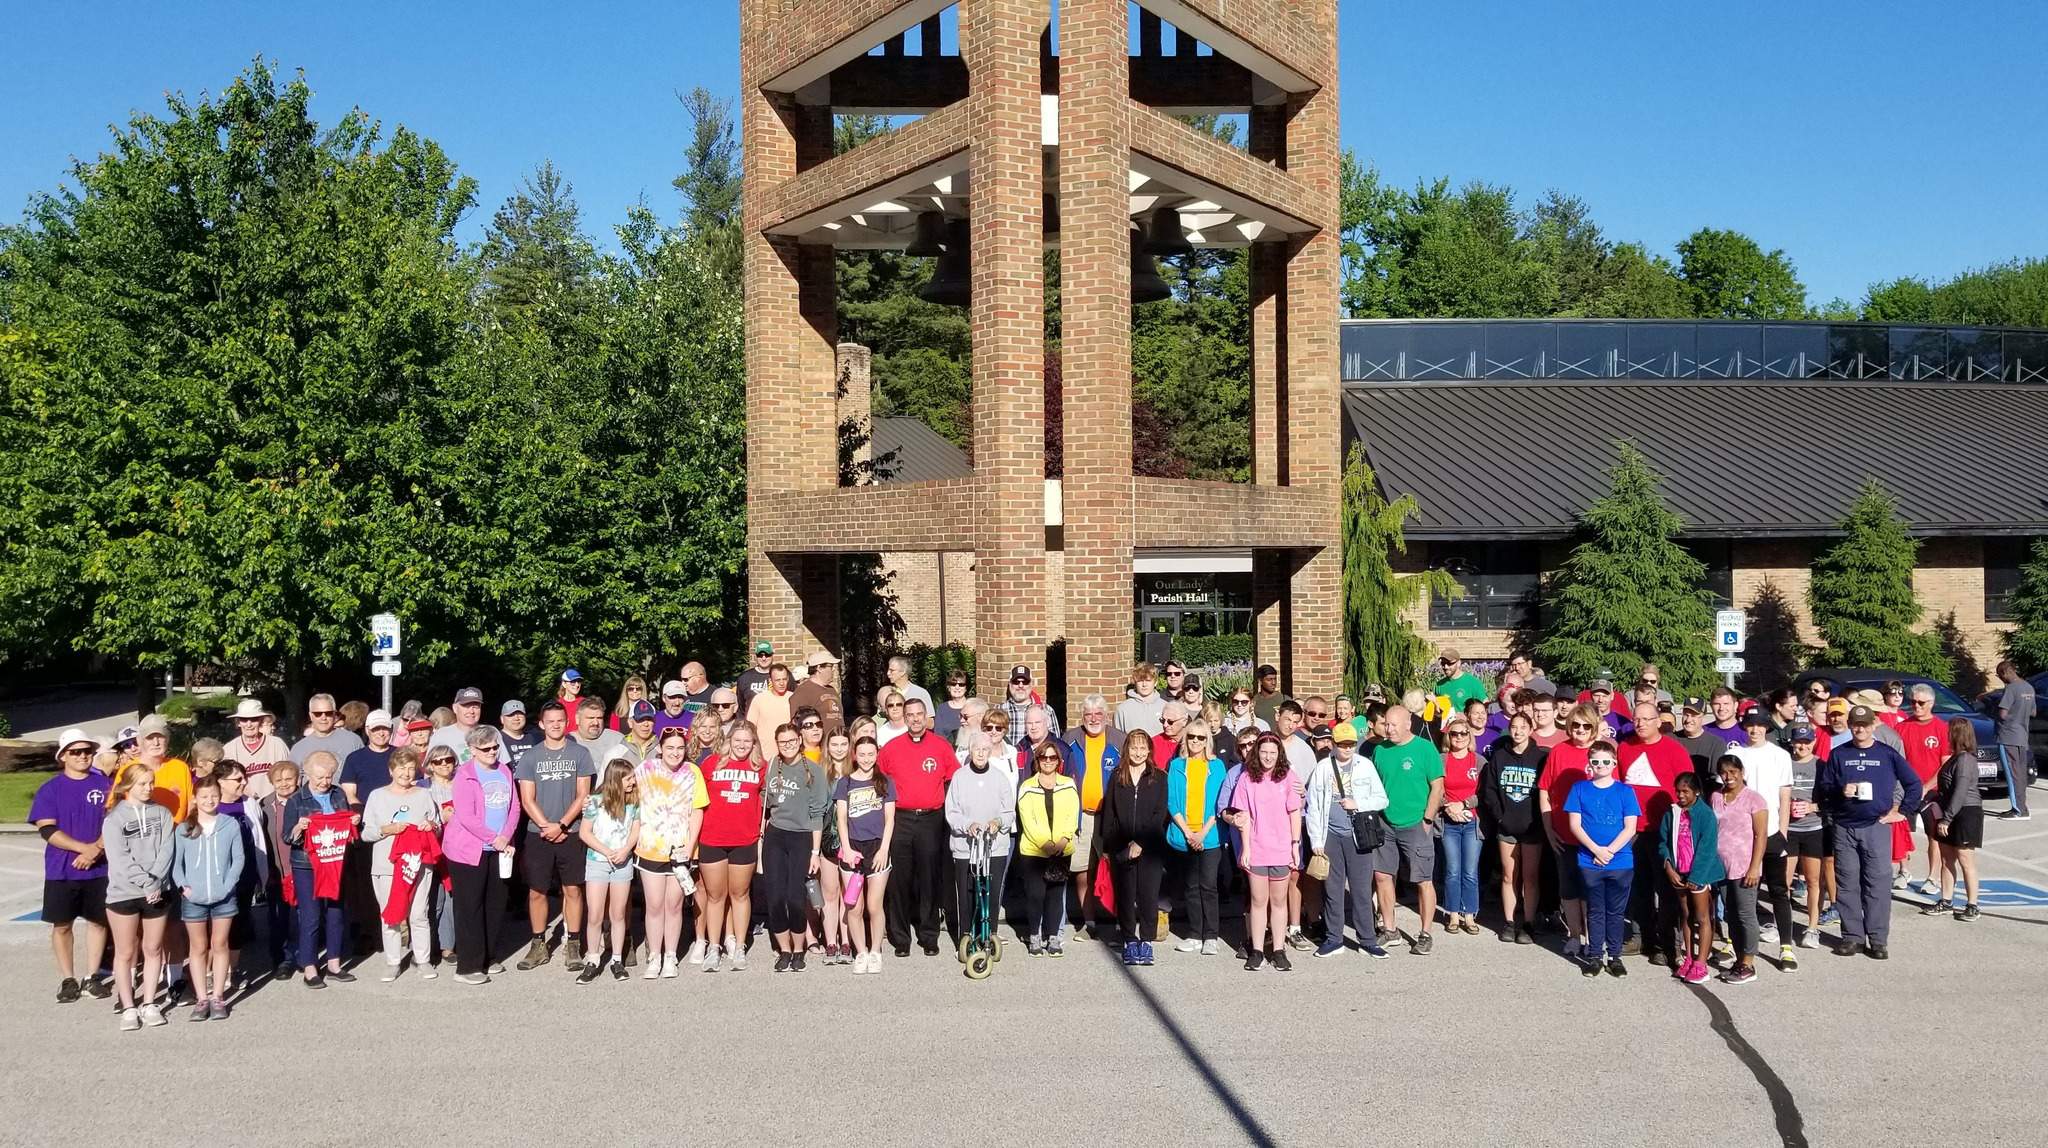 More than 100 people gathered in June 2022 to participate in Our Lady of Perpetual help Parish's annual day of service, where parishioners went out into the community to help at more than 30 project sites. Photo courtesy of the Our Lady of Perpetual Help Facebook Page.